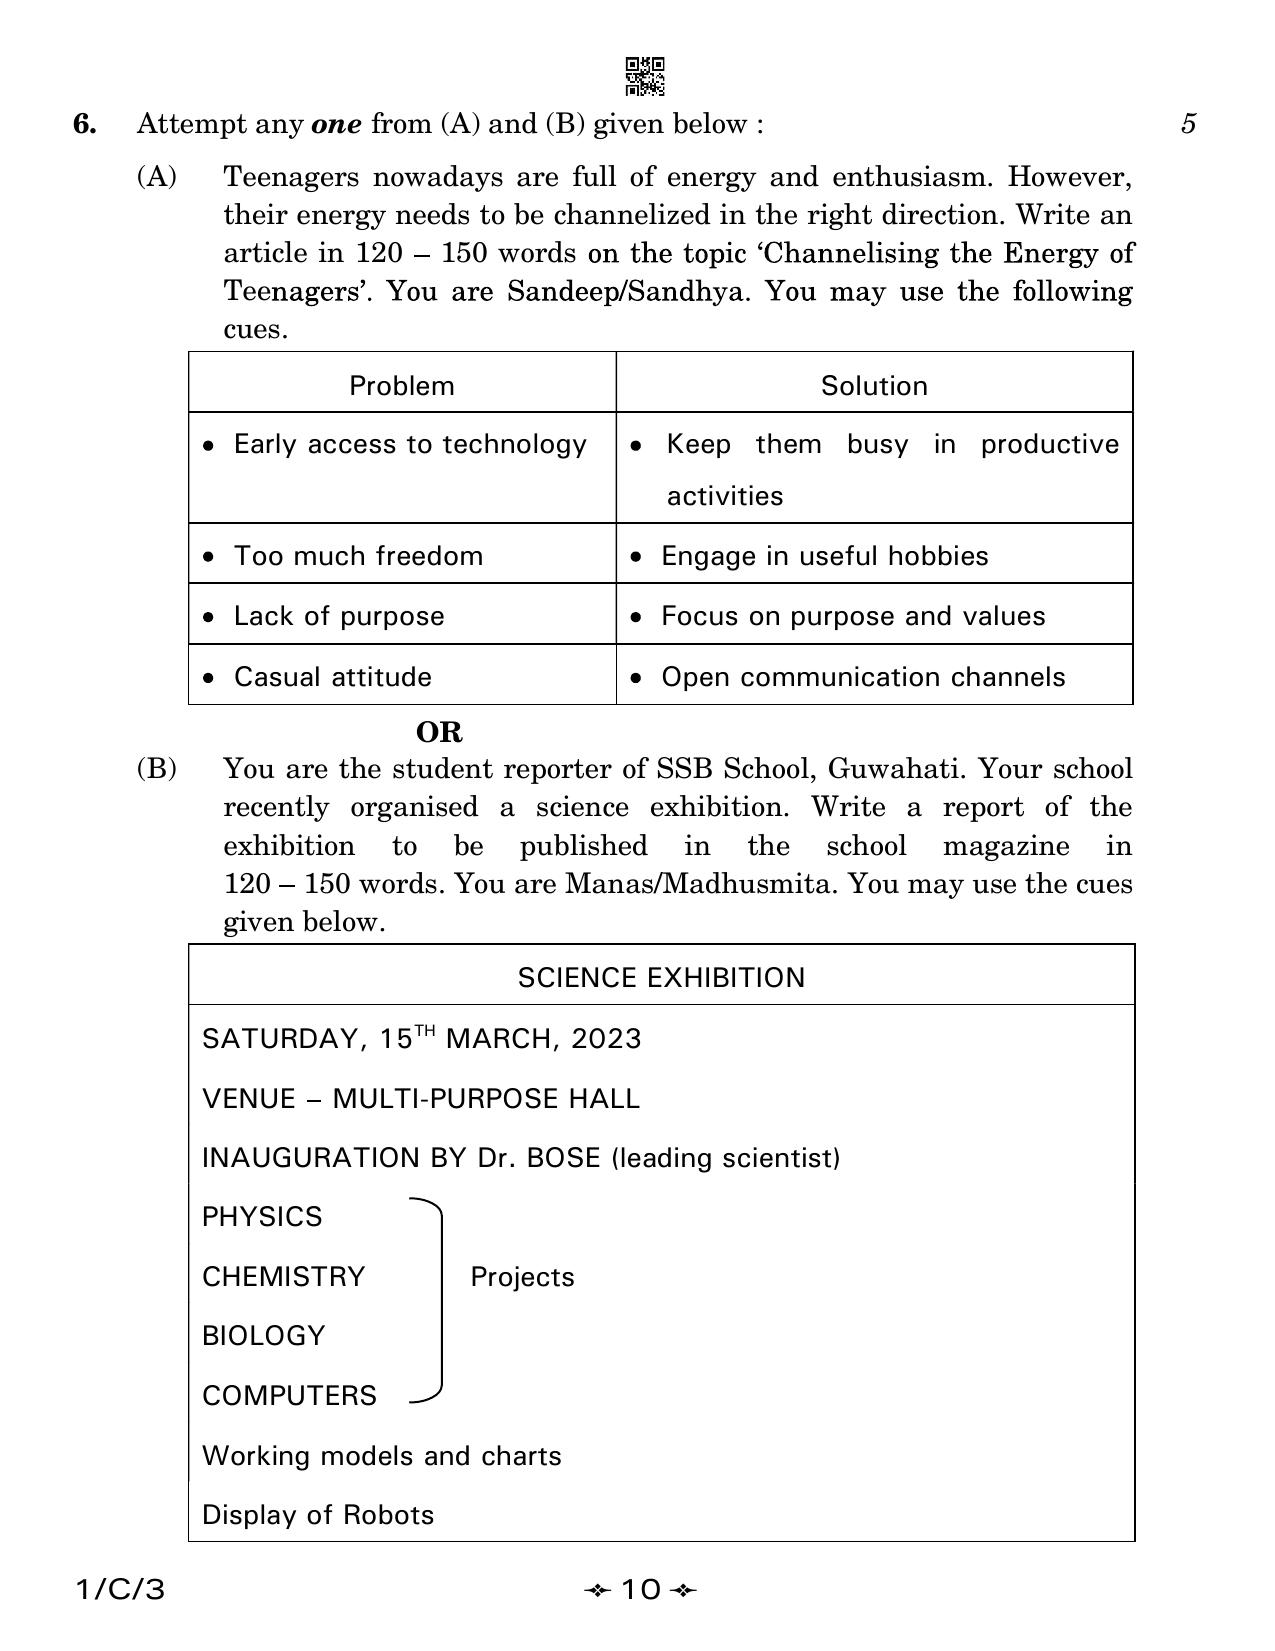 CBSE Class 12 1-3 English Core 2023 (Compartment) Question Paper - Page 10